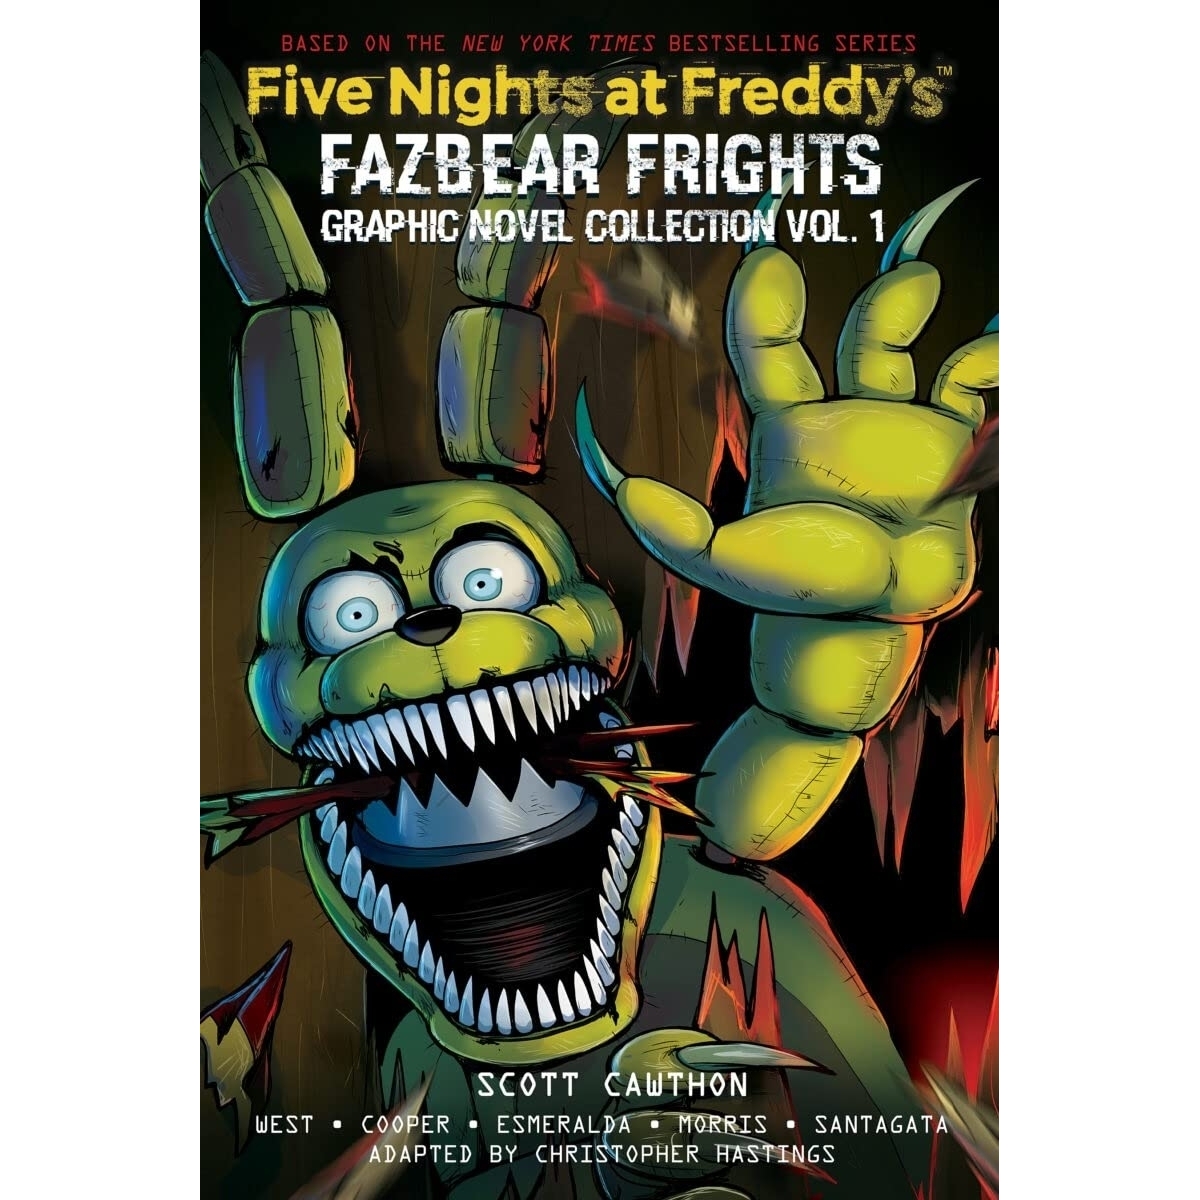 Five Nights at Freddy's Graphic Novels: Five Nights at Freddy's: Fazbear Frights Graphic Novel Collection Vol. 1 (Five Nights at Freddy's Graphic Novel #4) (Paperback) - image 1 of 1